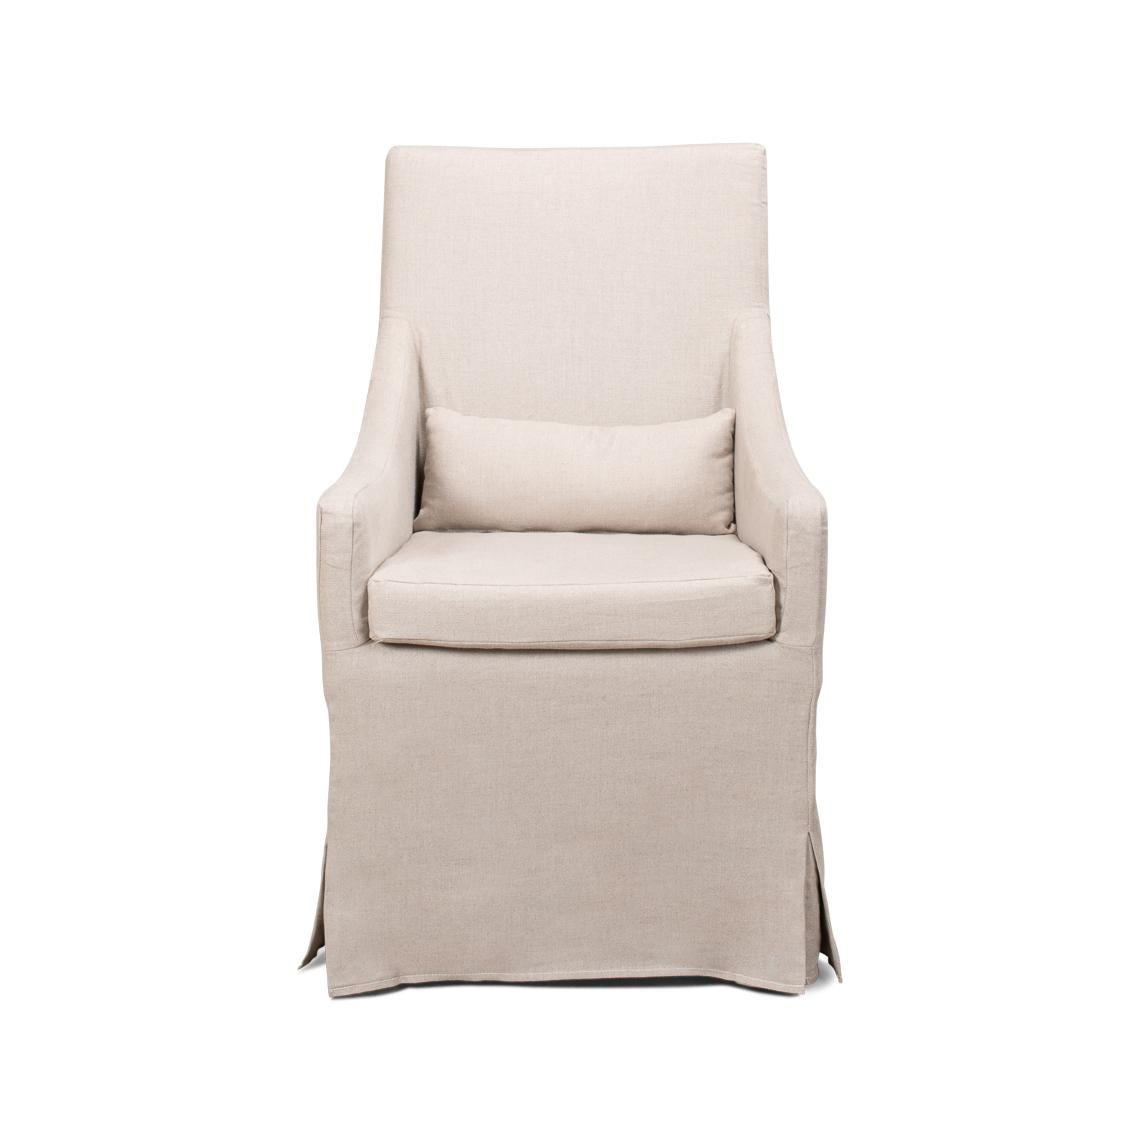 Elevate your living space with this sophisticated piece that seamlessly blends comfort with chic style. Crafted with a durable, sturdy frame, it's draped in a luxurious beige linen fabric.

Designed for those who appreciate a blend of modern design